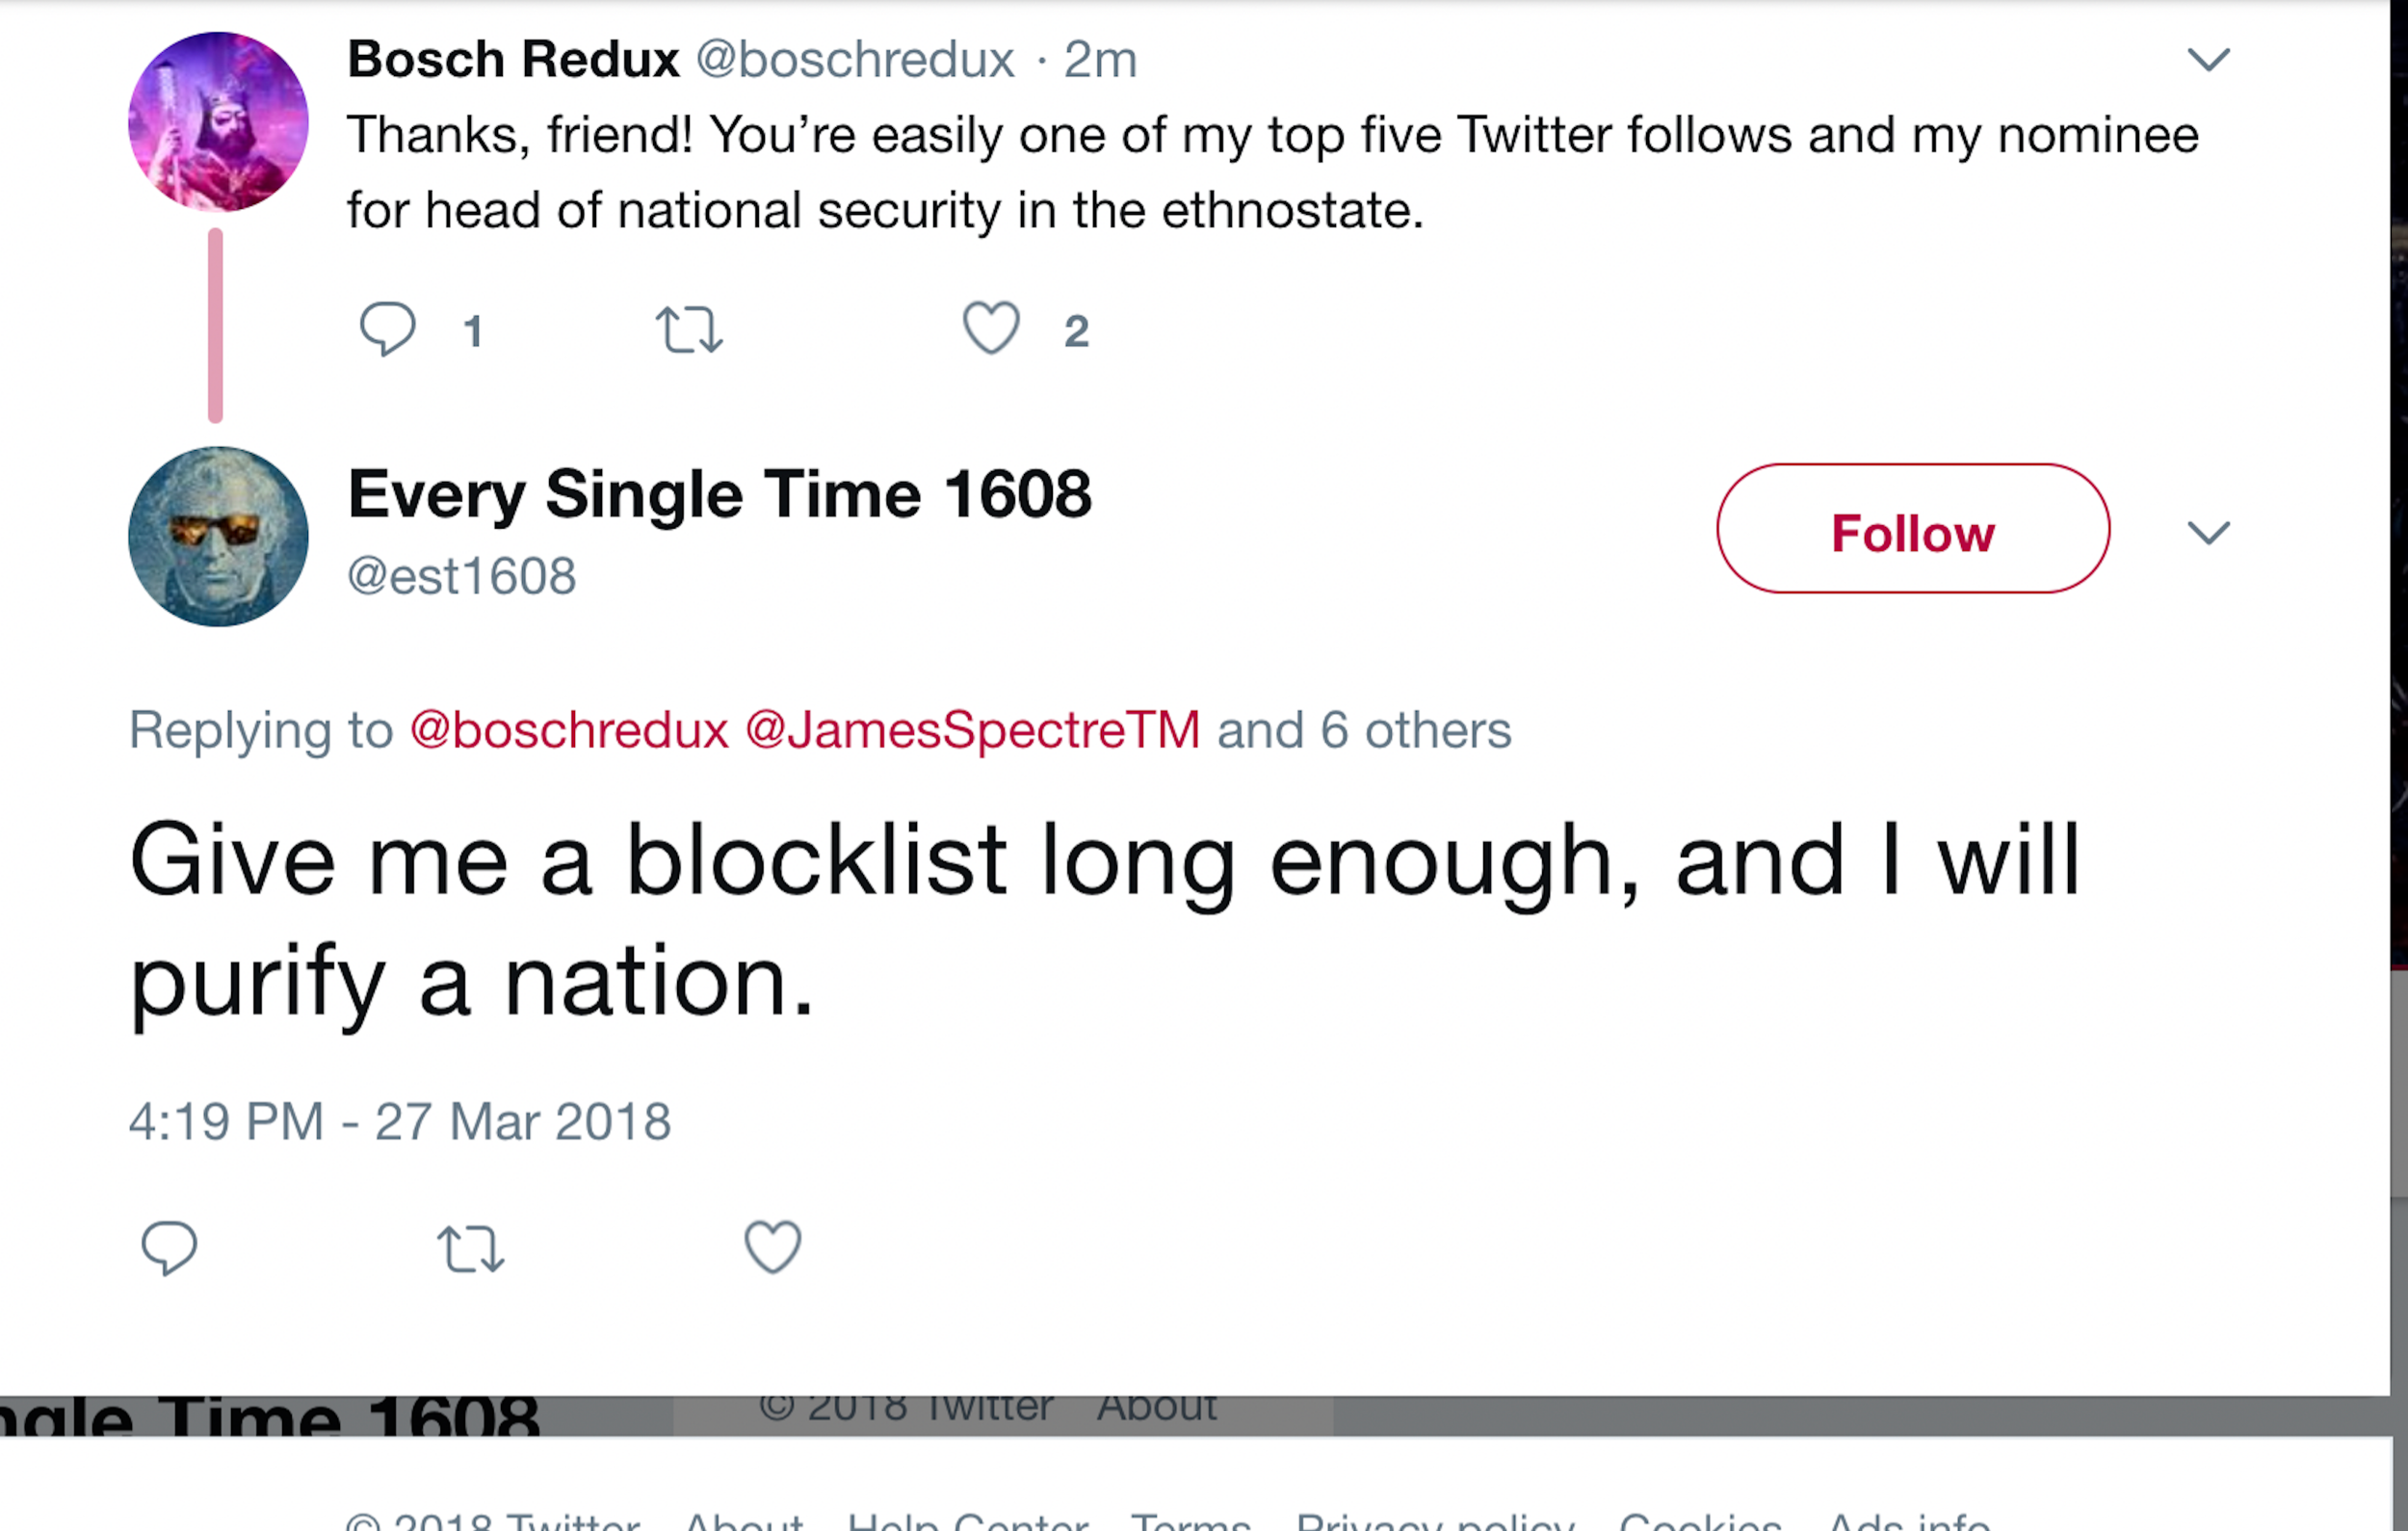 Woe: “Give me a block list long enough and I will purify a nation.” Replying to "Bosch REdux" calling him "Friend" and saying "you're easily one of my top five Twitter follows and my nominee for head of national security in the ethnostate."